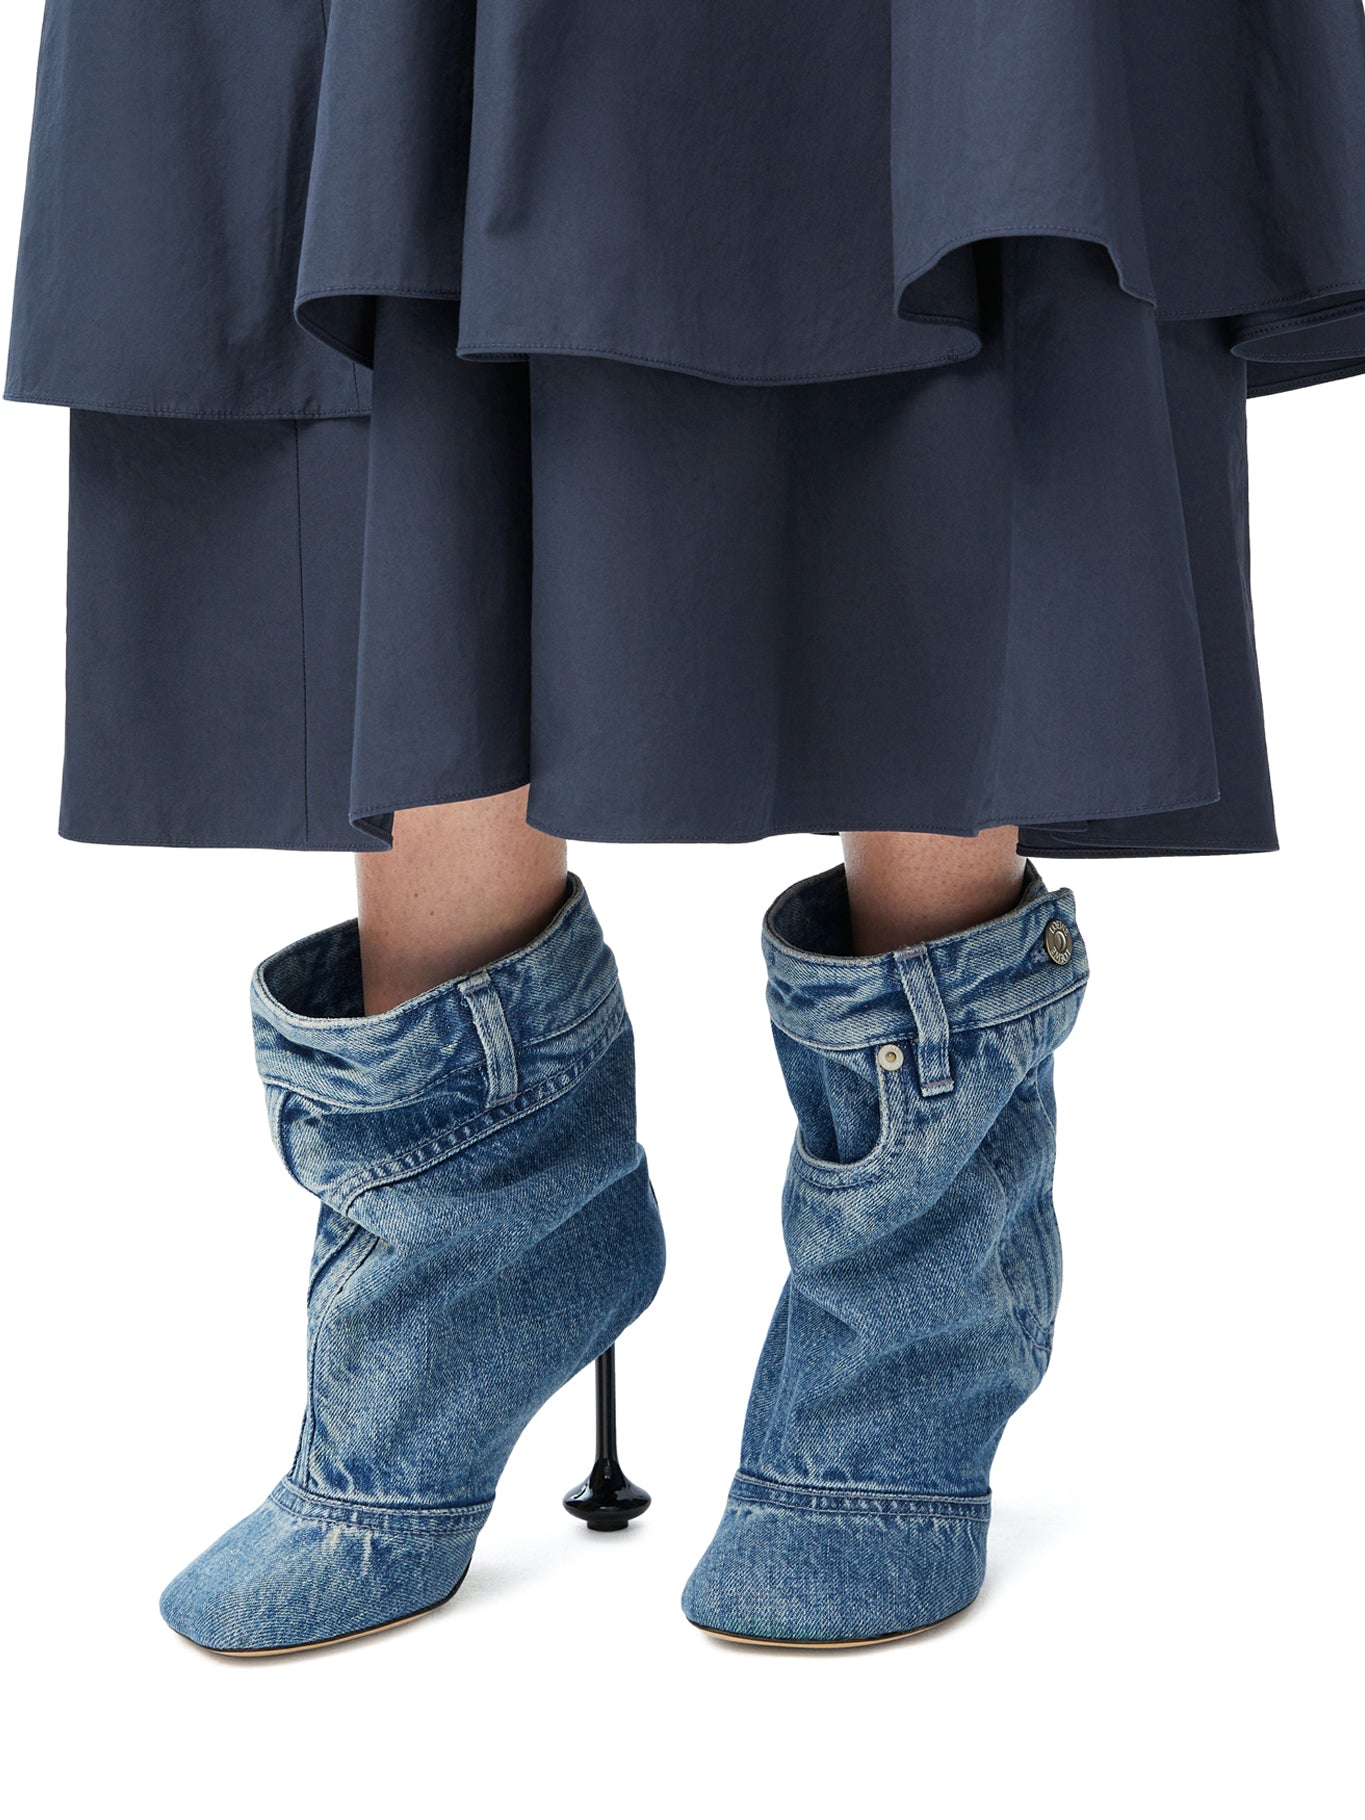 Toy ankle bootie in washed denim